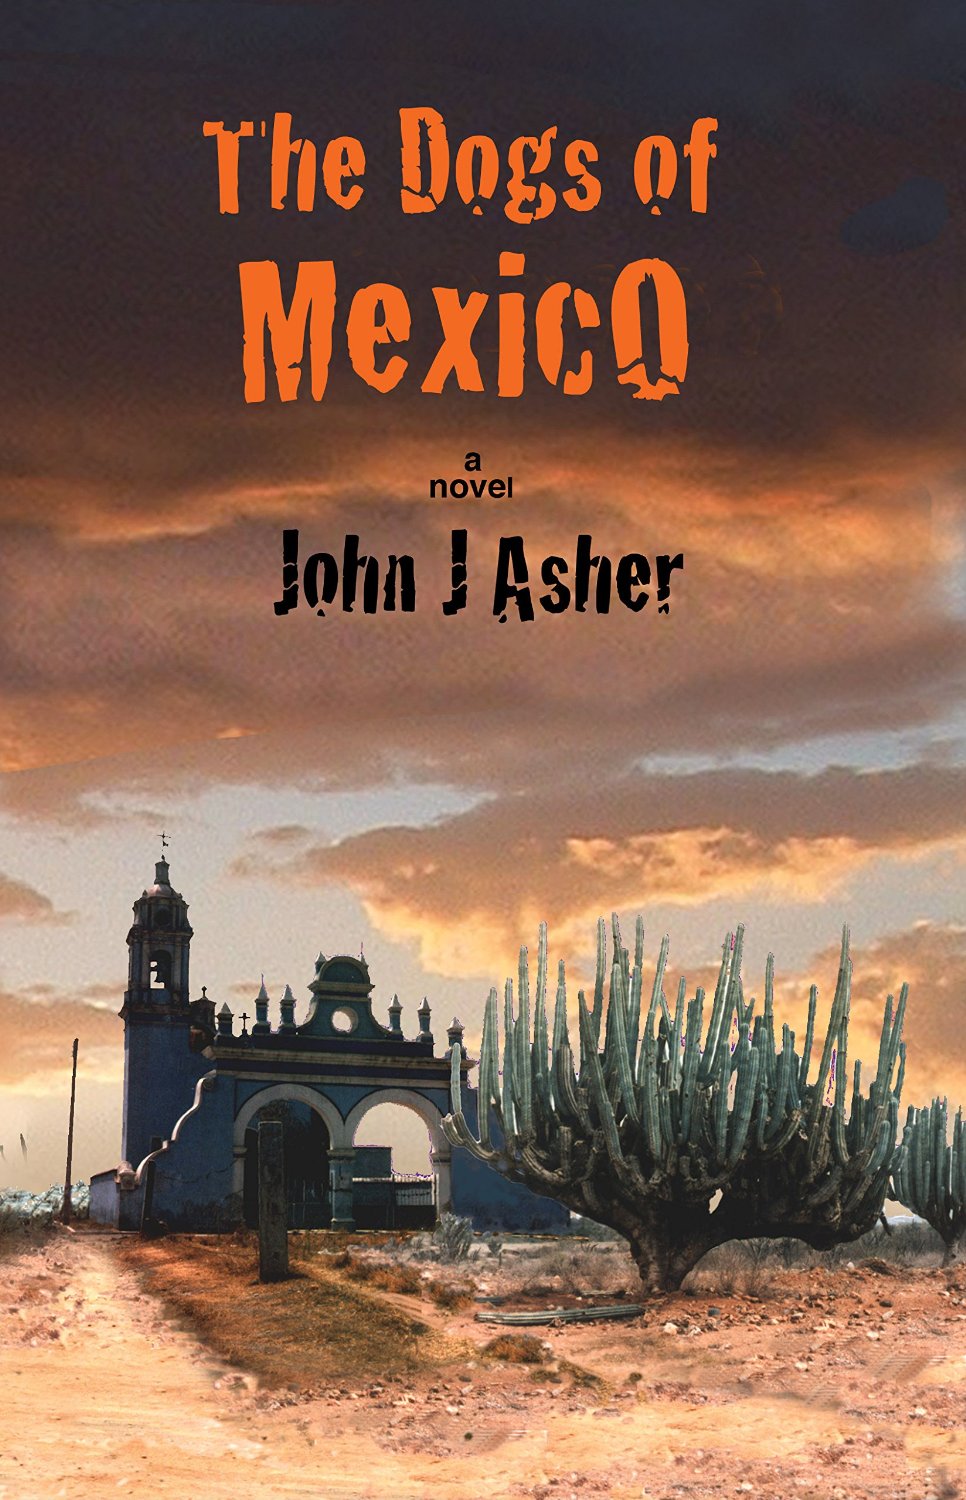 The Dogs of Mexico by John J Asher